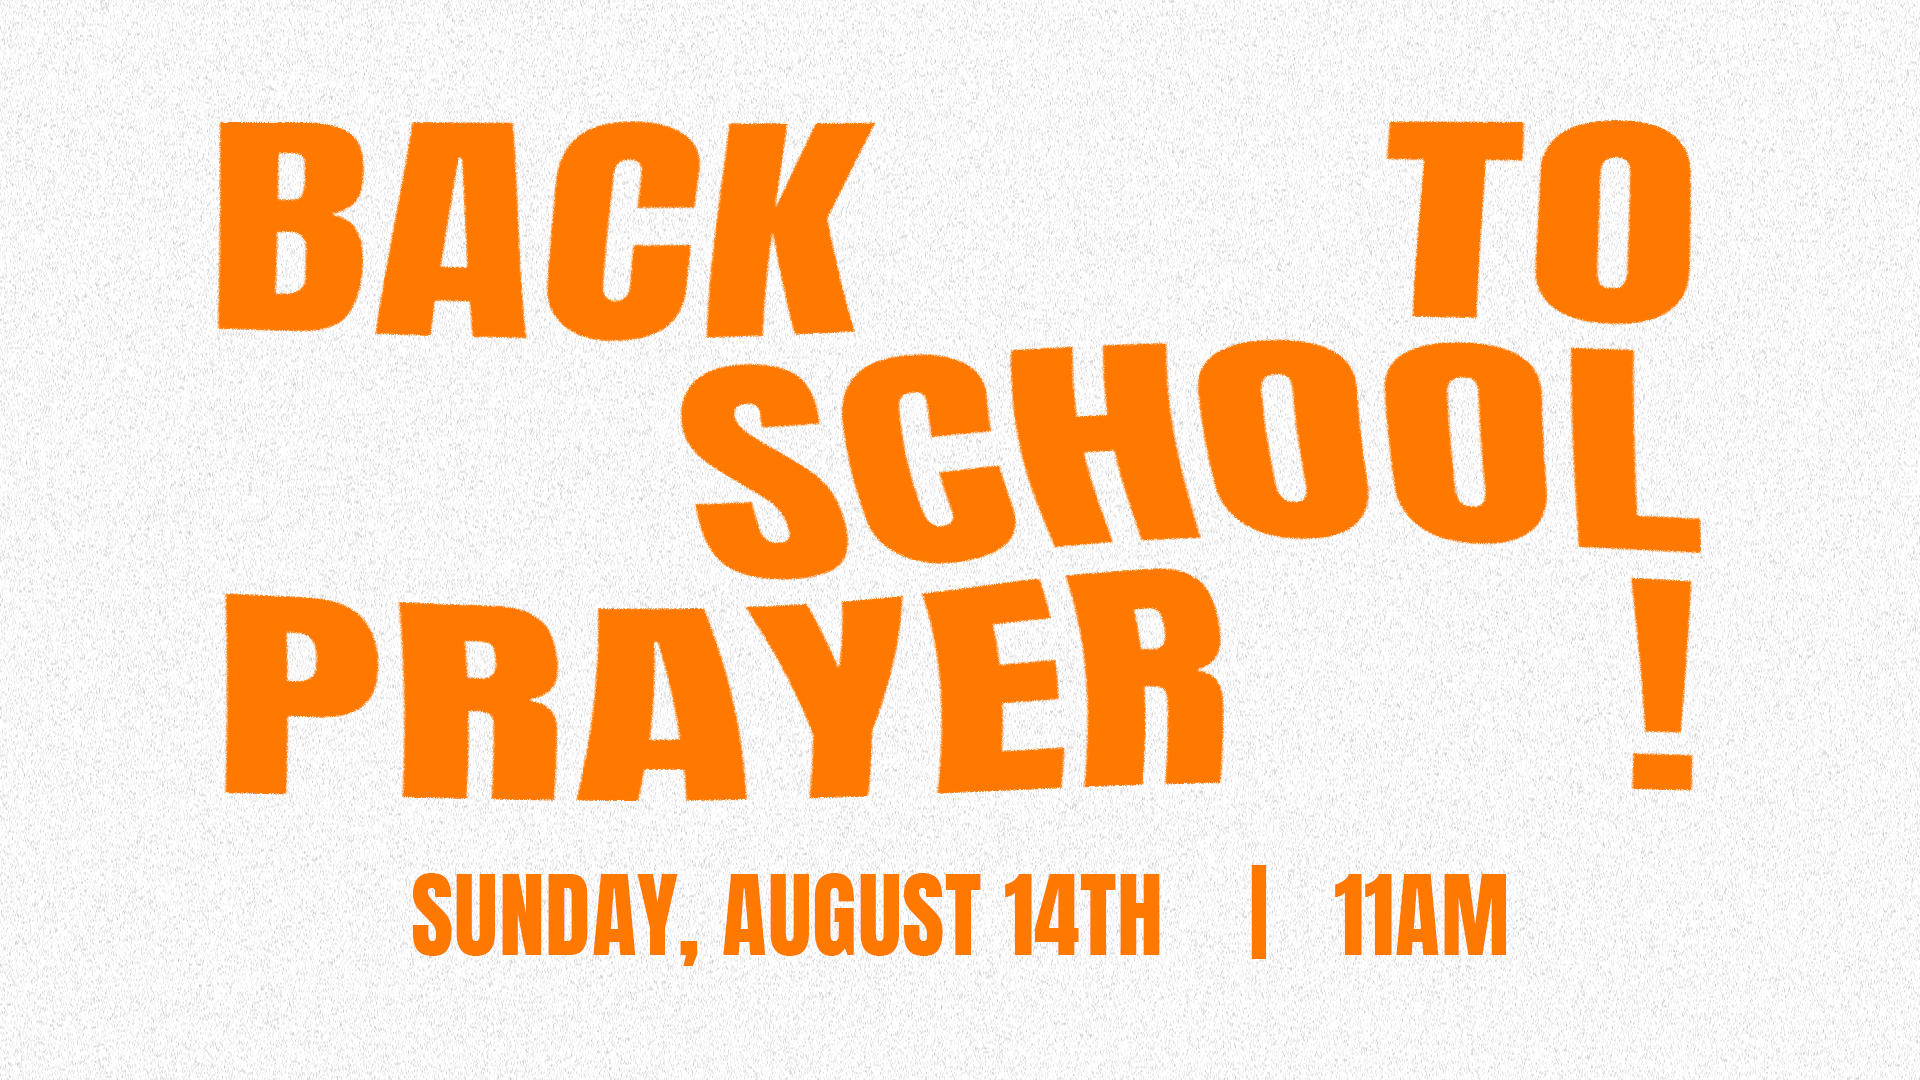 Back to School Prayer  at the Spartanburg campus